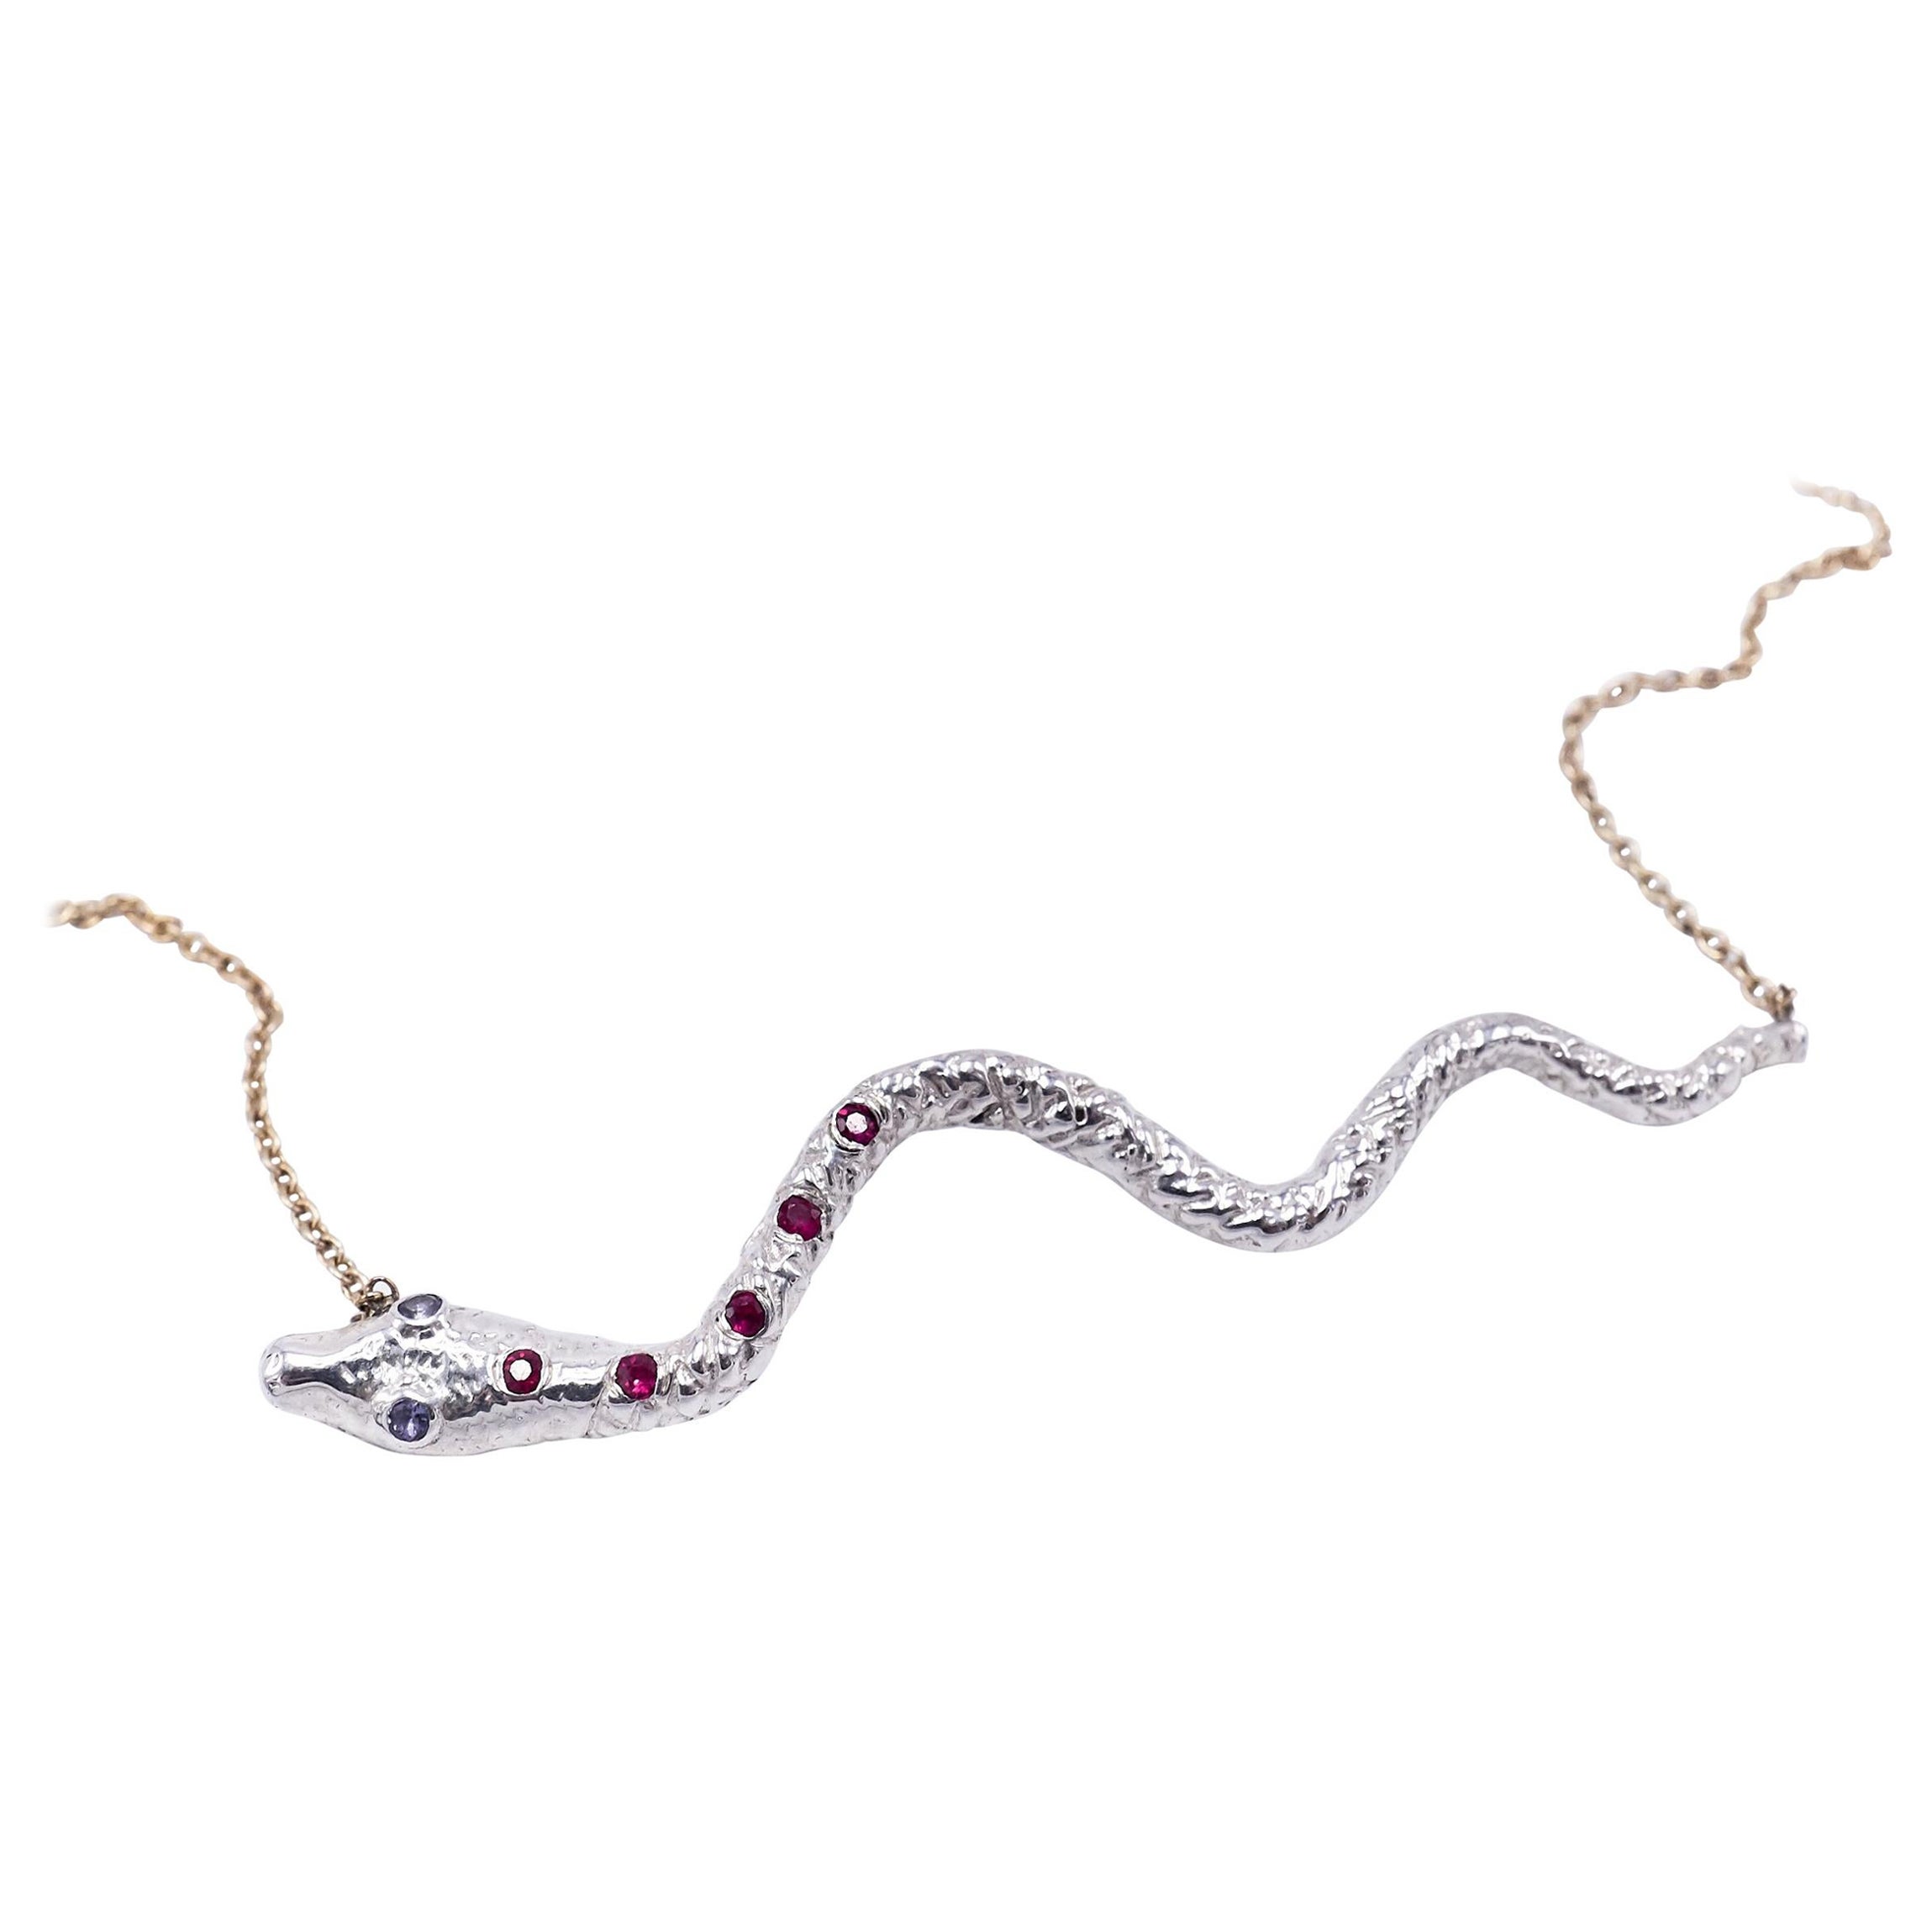 Snake Necklace Silver Ruby Iolite Gold Filled Chain J Dauphin For Sale